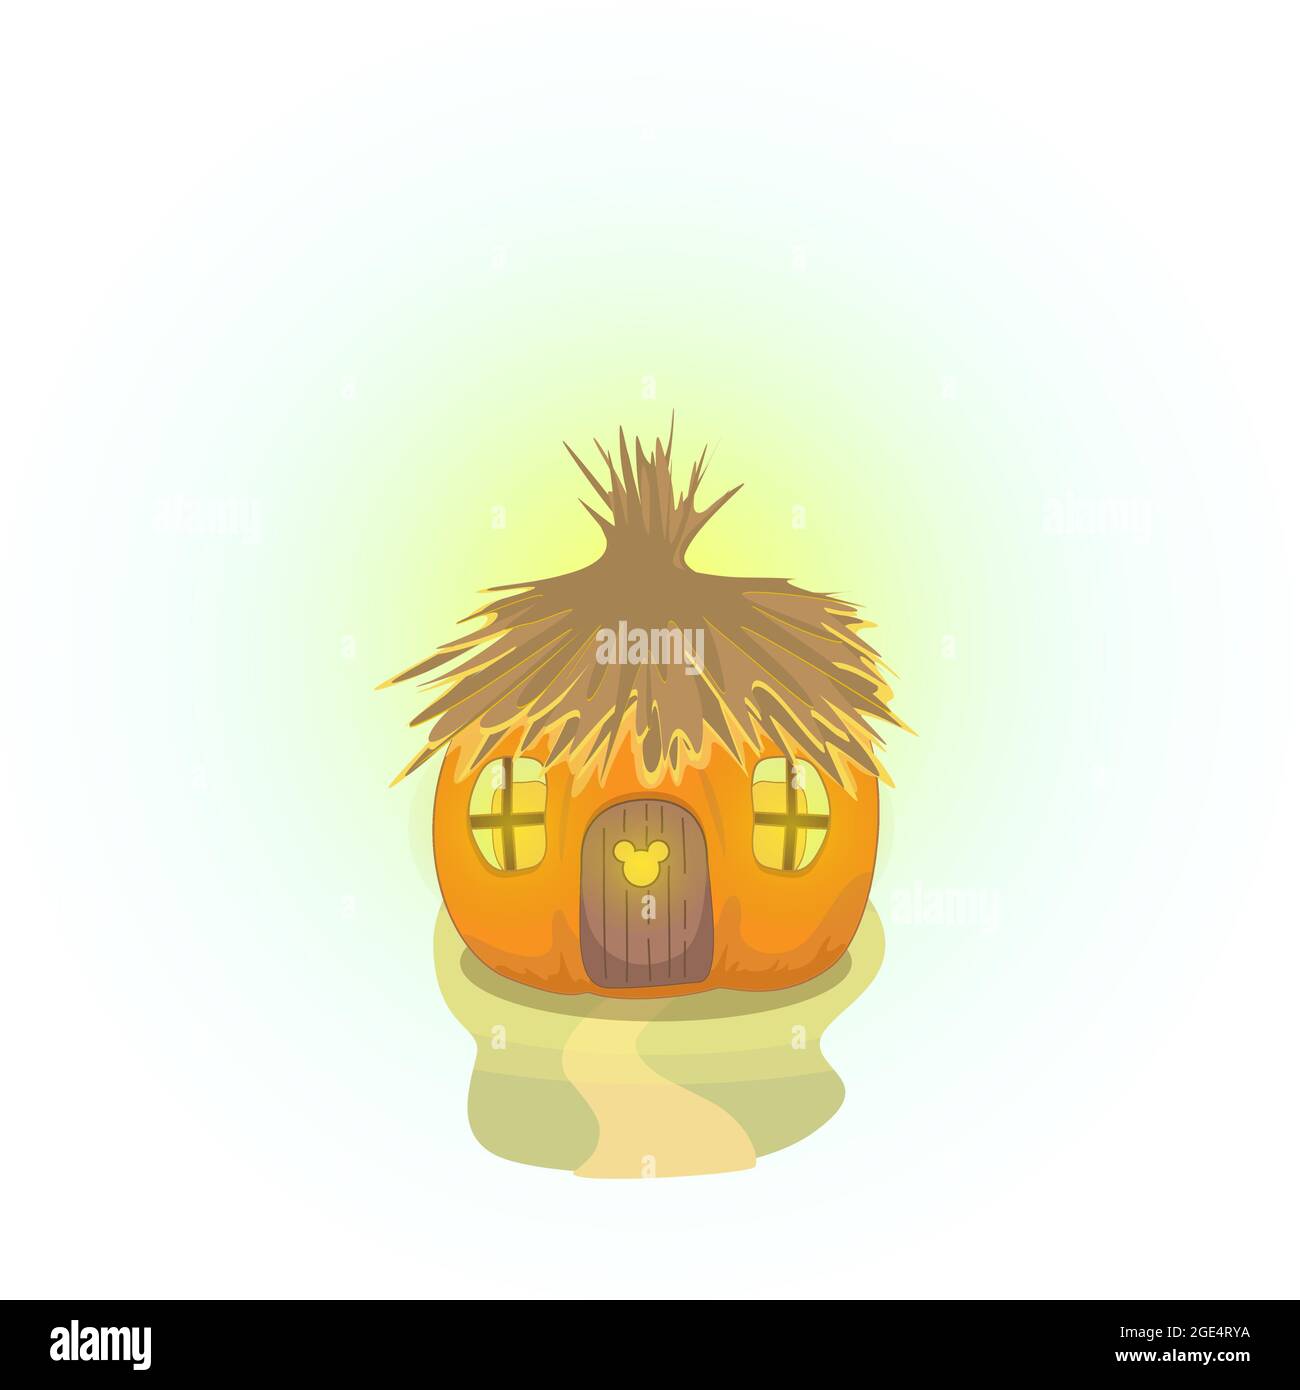 Vector image of a mouse house in the form of a pumpkin with a thatched roof and carved Windows.  Series of illustrations. Calendar item Stock Vector